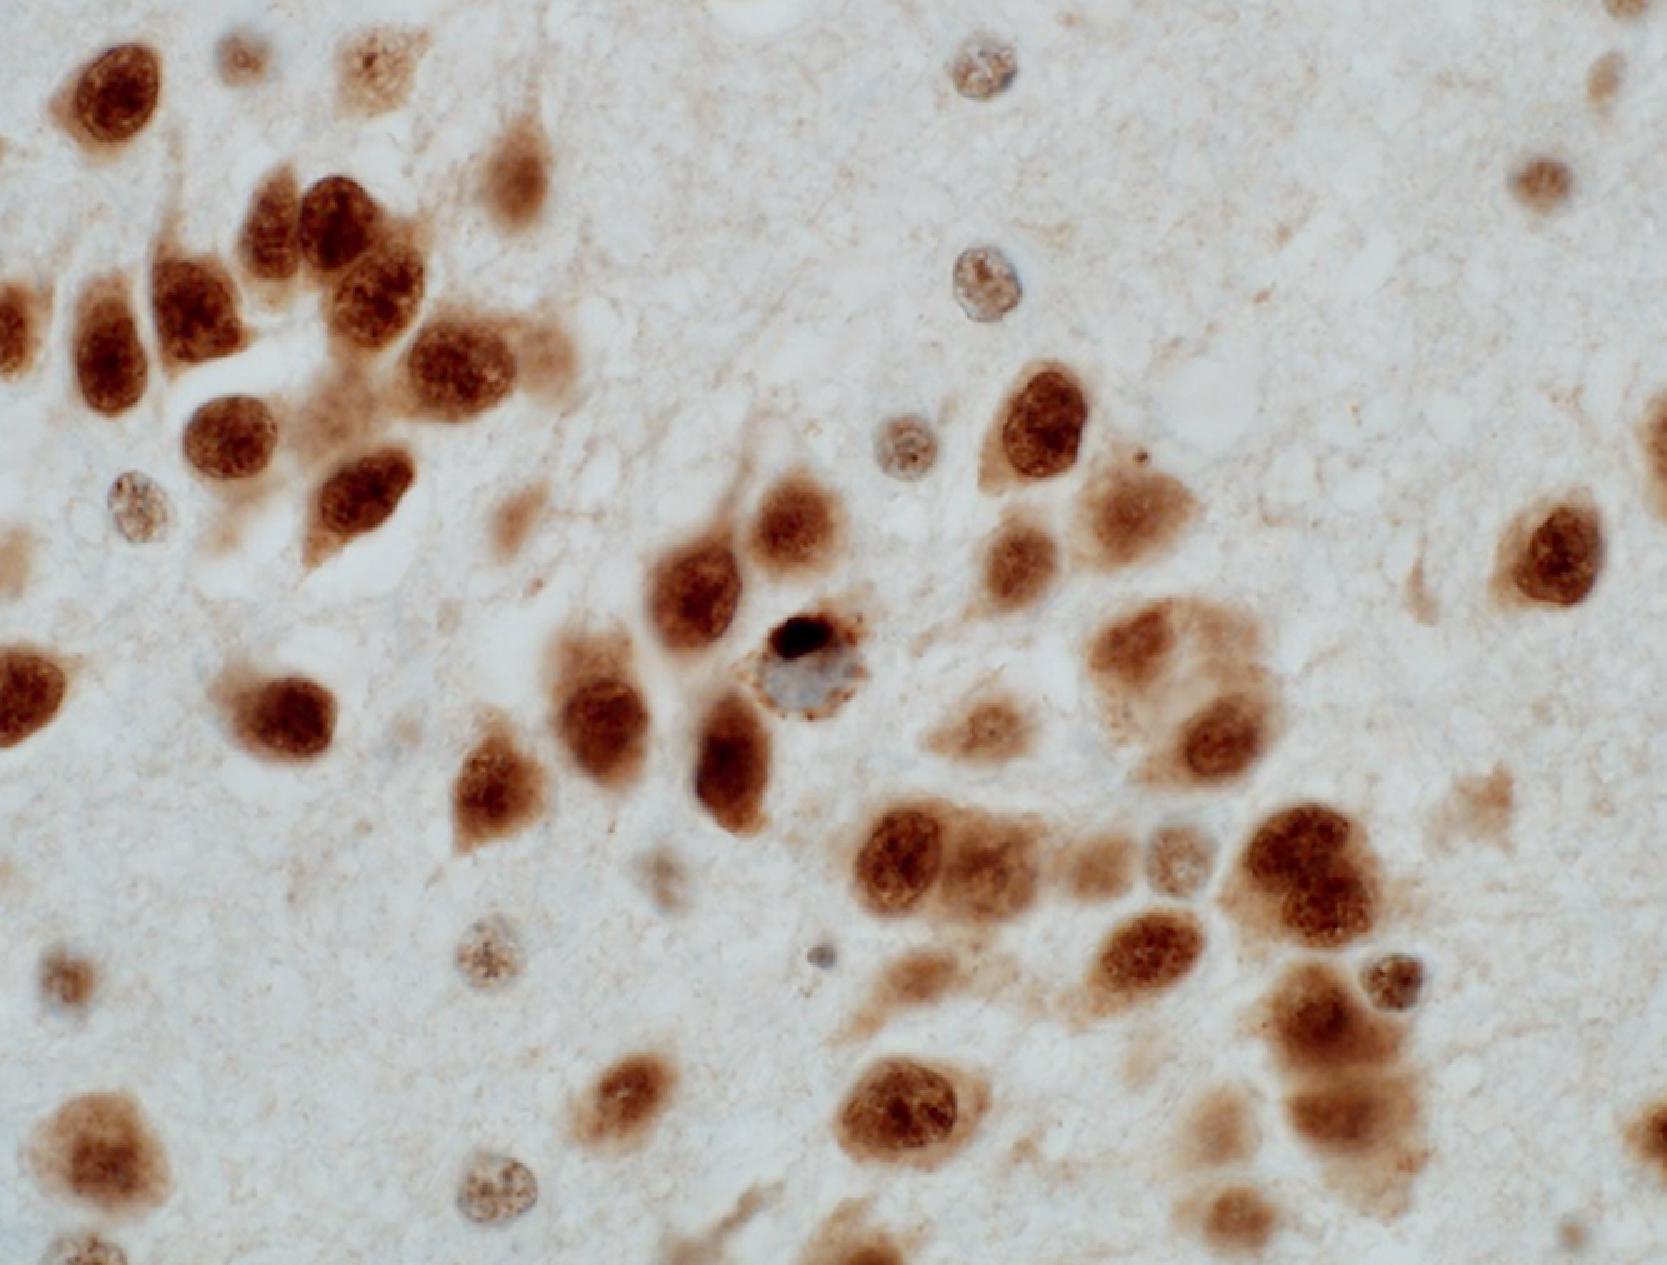 Figure 6.14, Limbic-predominant age-related TDP-43 encephalopathy–neuropathologic change is characterized by pathologic inclusions of TDP-43, as shown here in the dentate gyrus of the hippocampal formation. Shown is an N-terminal/full-length TDP-43 immunostain and pathologic staining is shown in the neuron at center, with loss of nuclear staining and dense cytoplasmic staining.